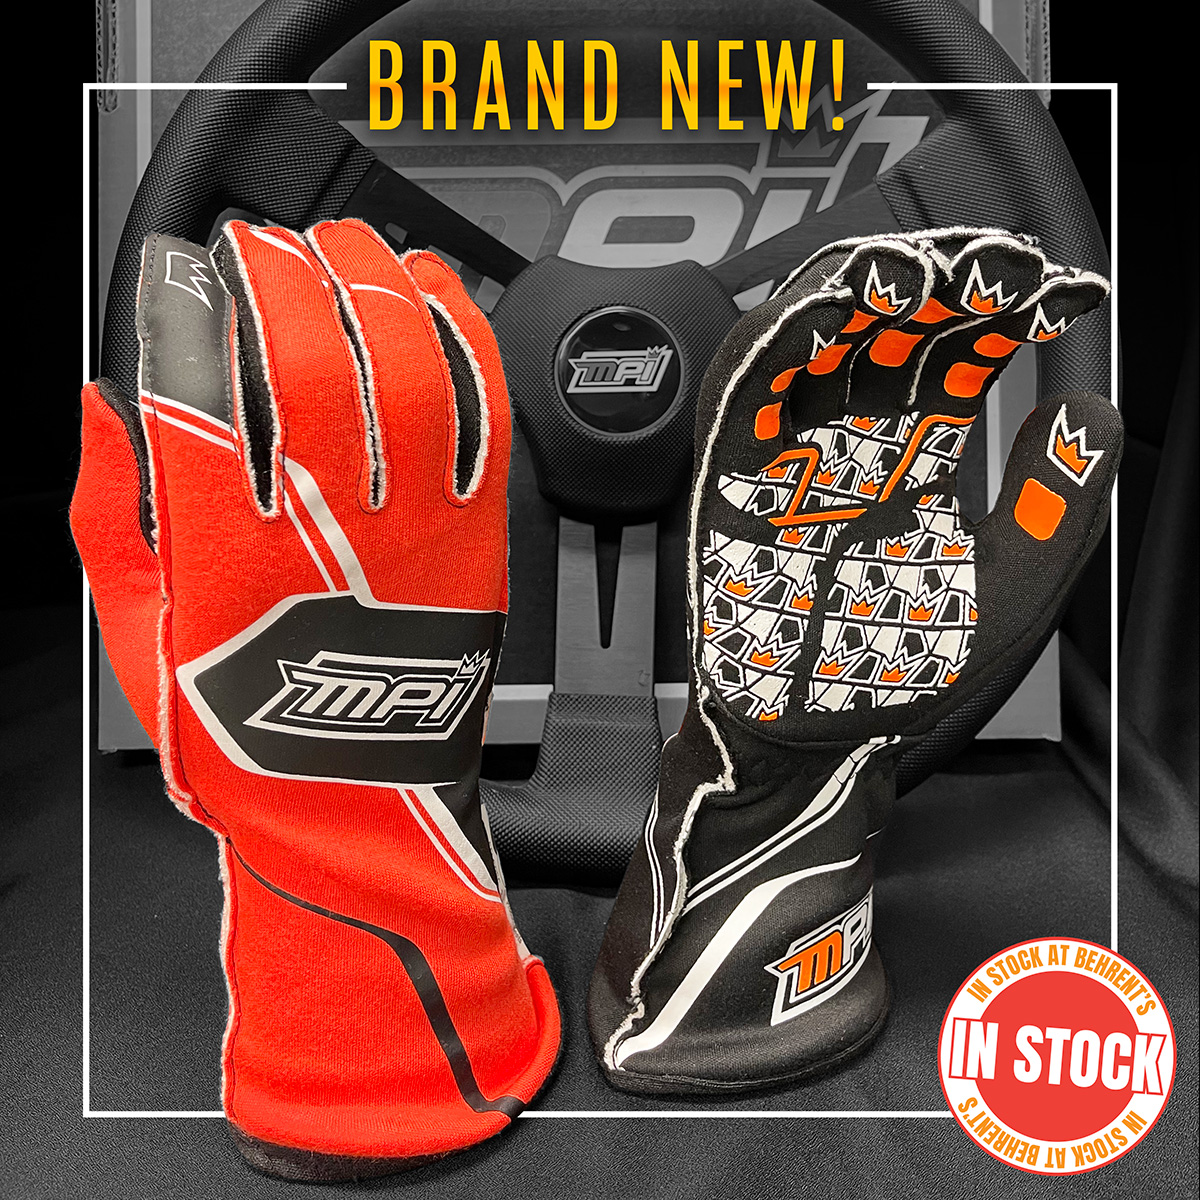 JUST RELEASED! We are one of the very first to receive the brand new MPI - Max Papis Innovations SFI driving gloves and have them available to ship TODAY!
👉 tinyurl.com/3y43ep9t
#MPIDifference #ispympi